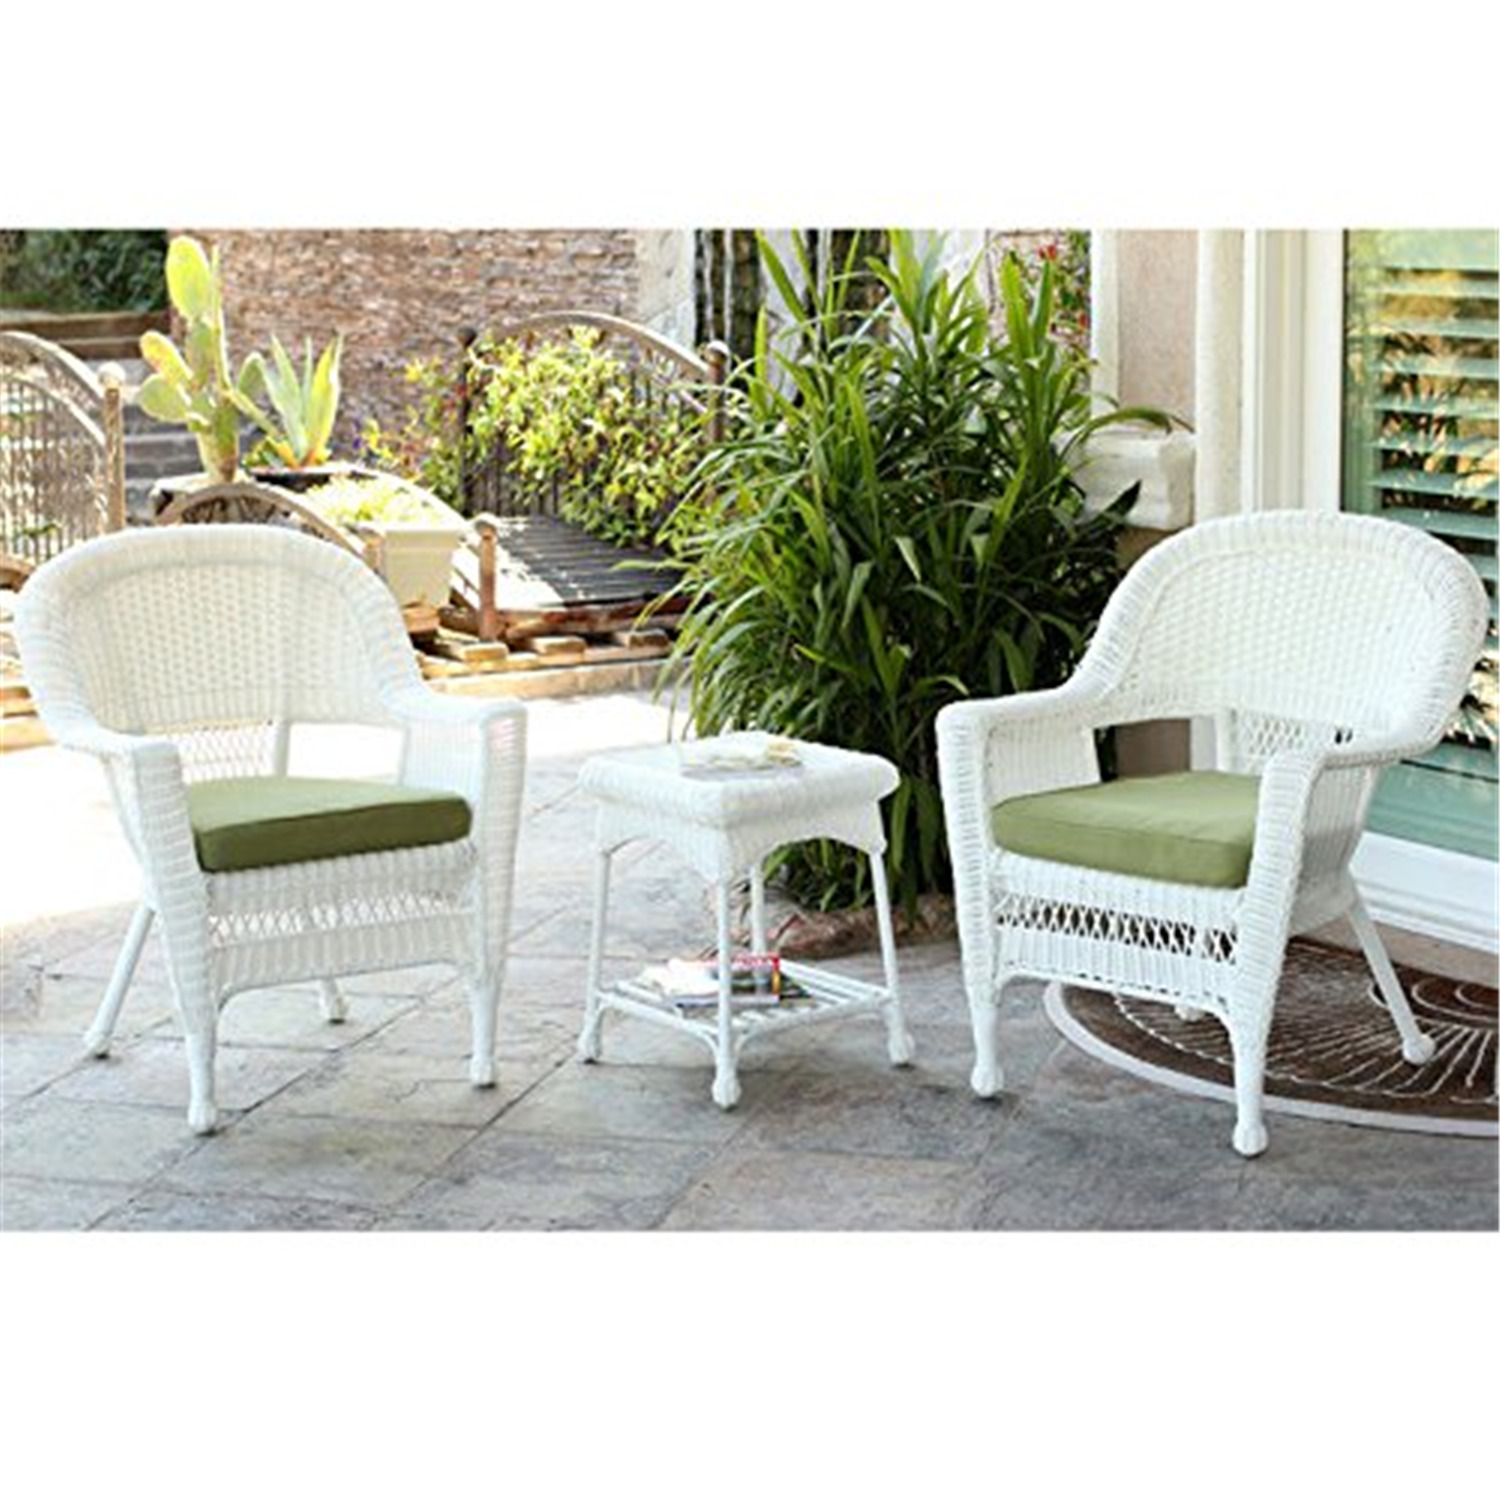 Jeco 3 Piece Wicker Conversation Set in White with Green Cushions - image 1 of 2